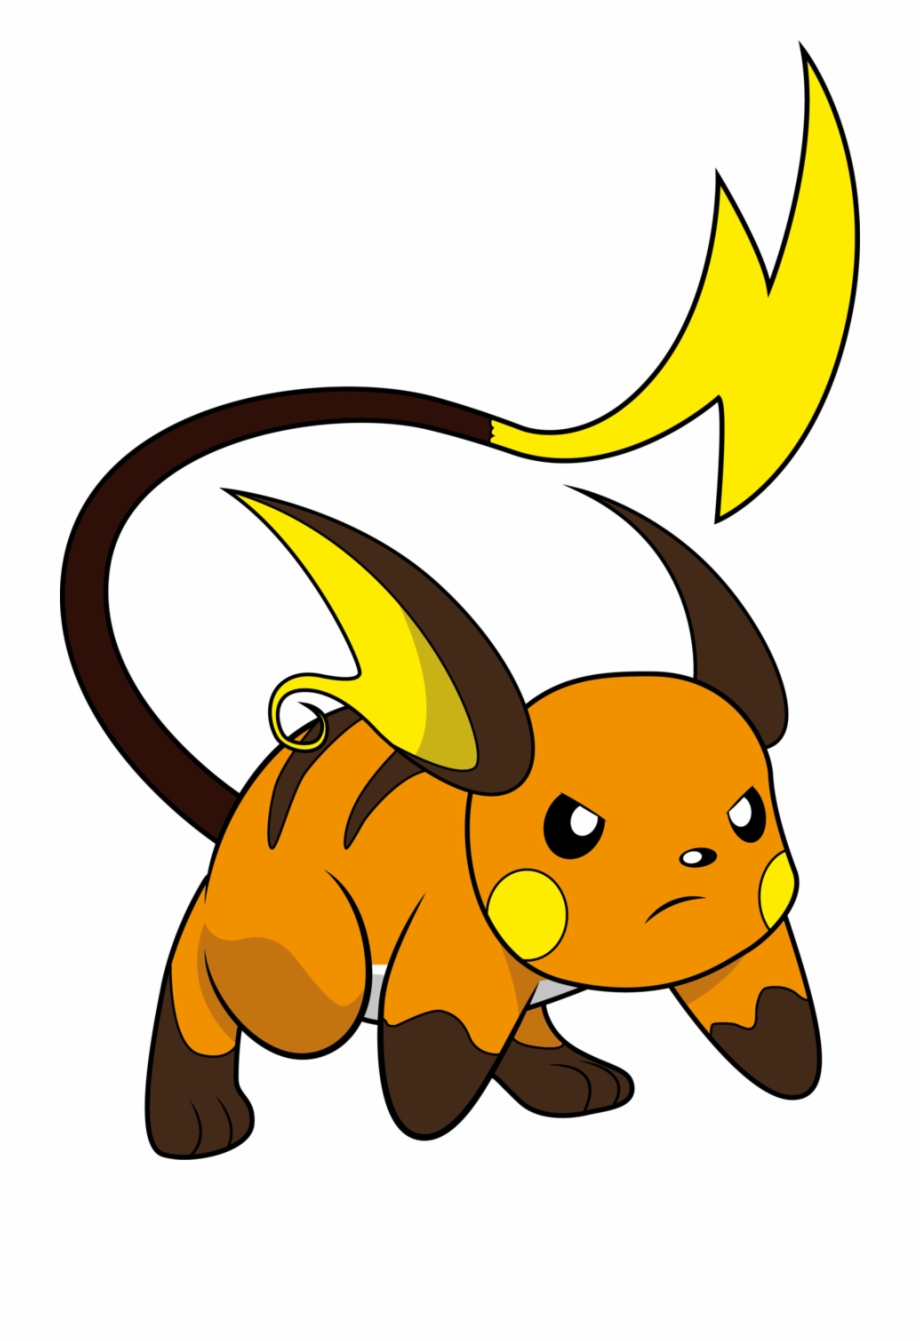 Raichu Is Often Used As A Lead, And Can Help Severely